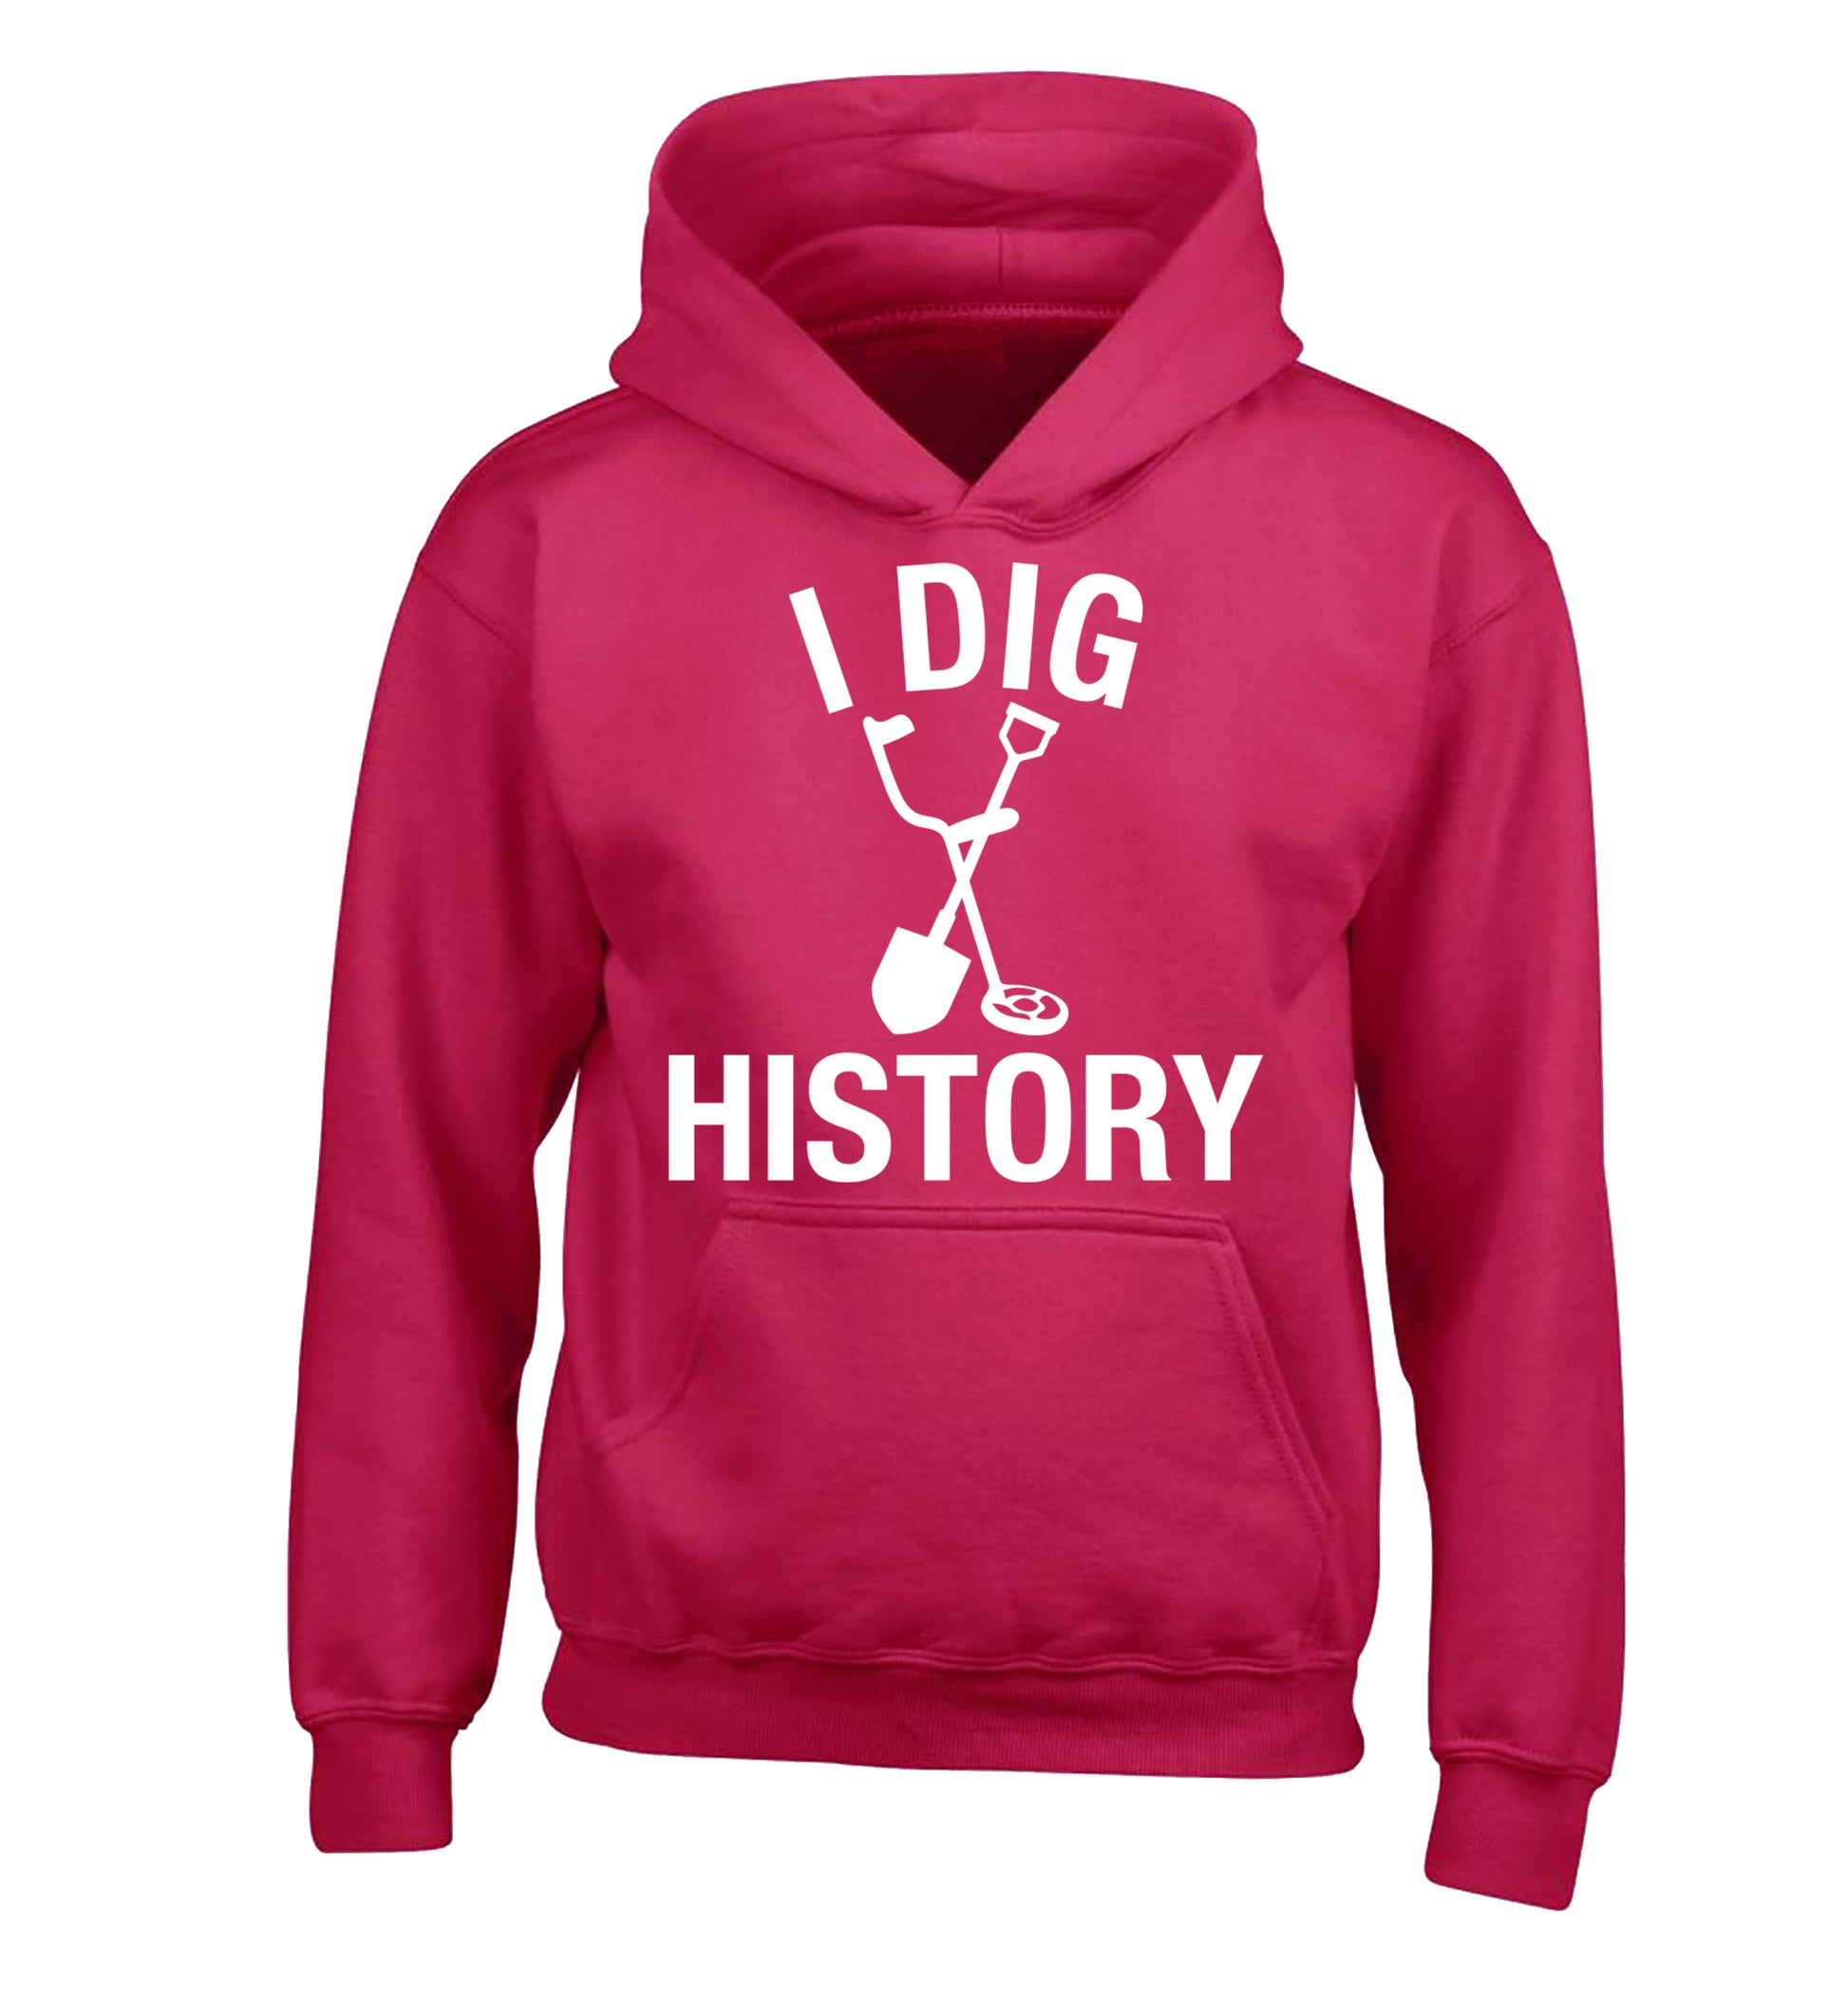 I dig history children's pink hoodie 12-13 Years